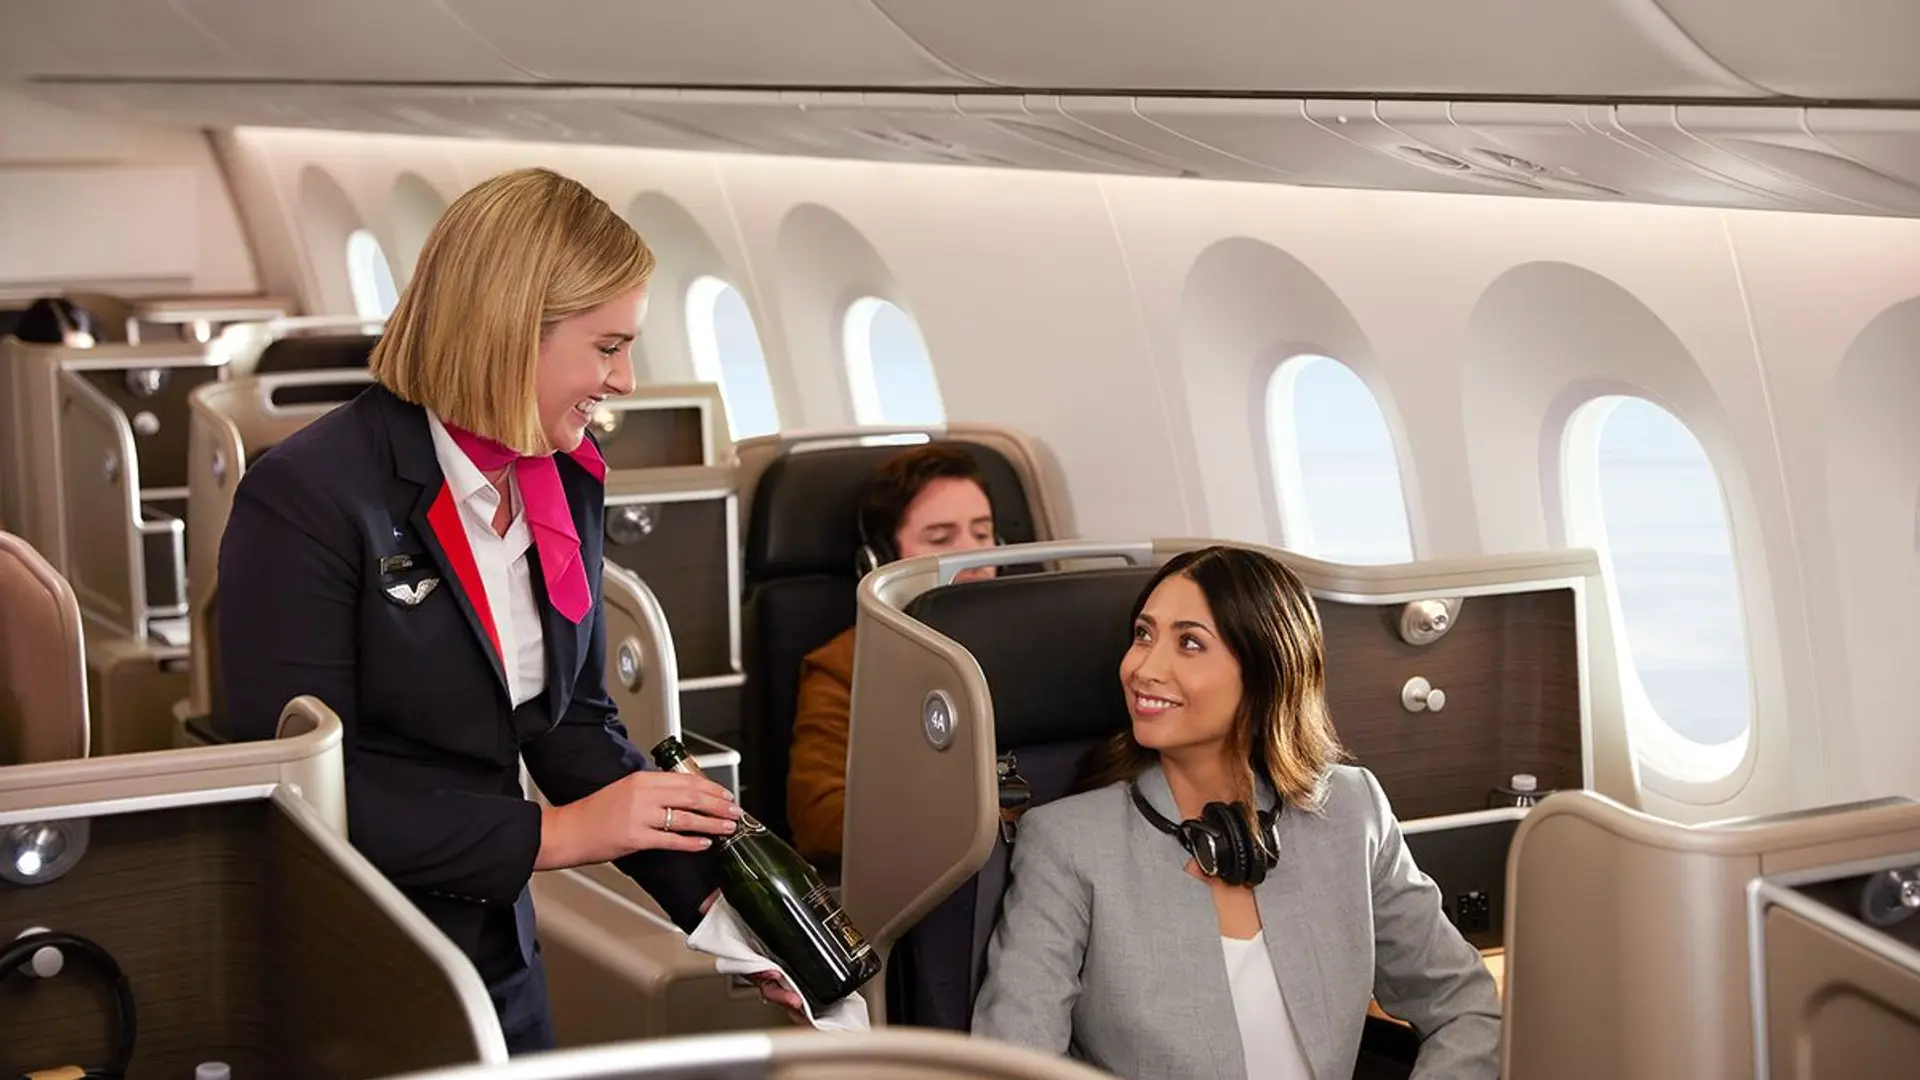 Airlines News - Qantas restarts New York route in style!